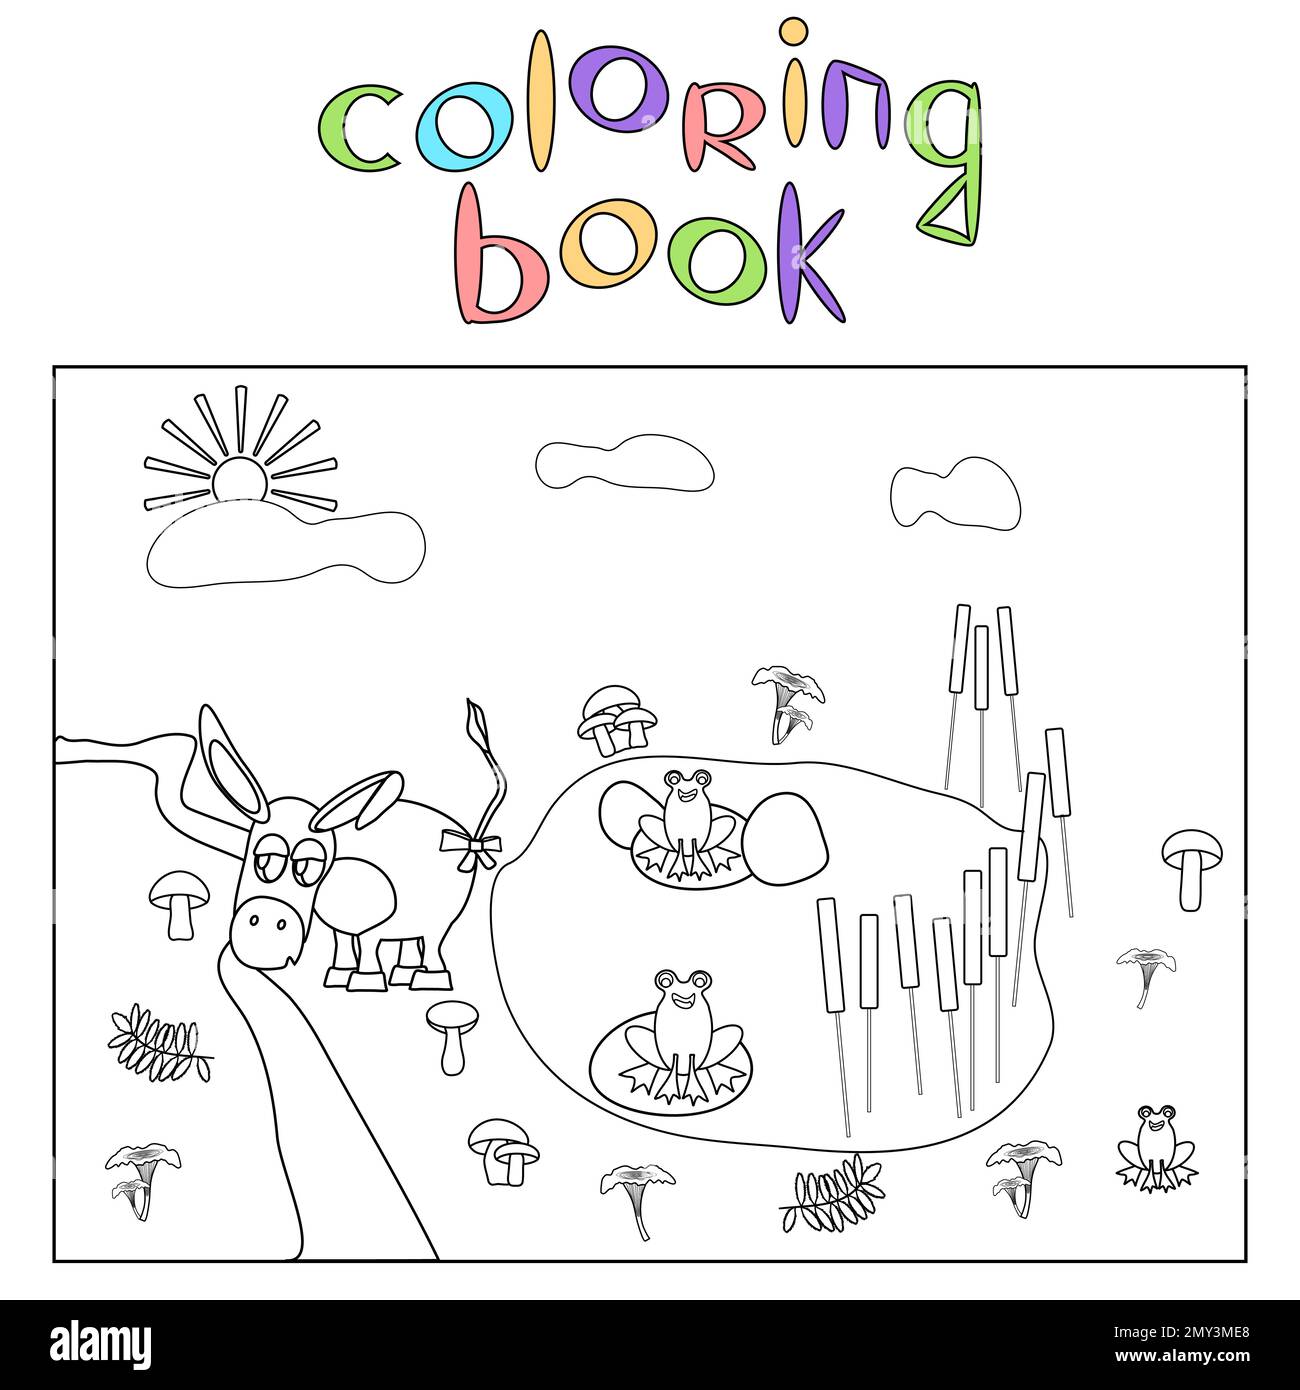 color-a-drawing-for-children-from-4-to-6-years-old-stock-vector-image